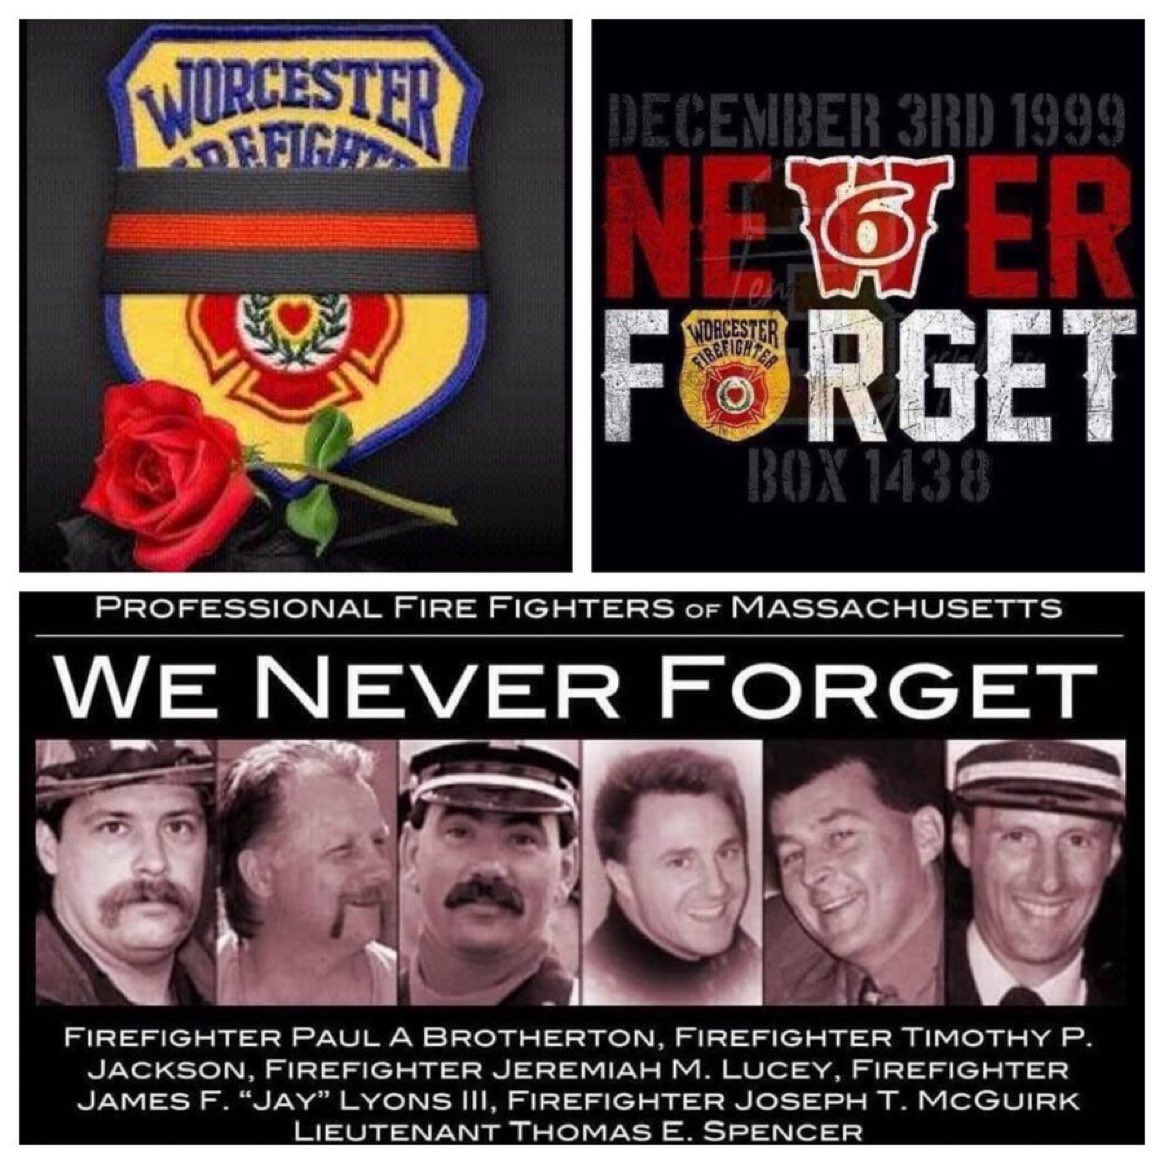 24 years ago today 6 brave
#Worcester #Firefighters made the
ultimate sacrifice at the Worcester Cold Storage warehouse fire. 
#W6 #RIP #NeverToBeForgotten
#NeverForget  #Worcester6 🙏
#Firefighters #WorcesterFire